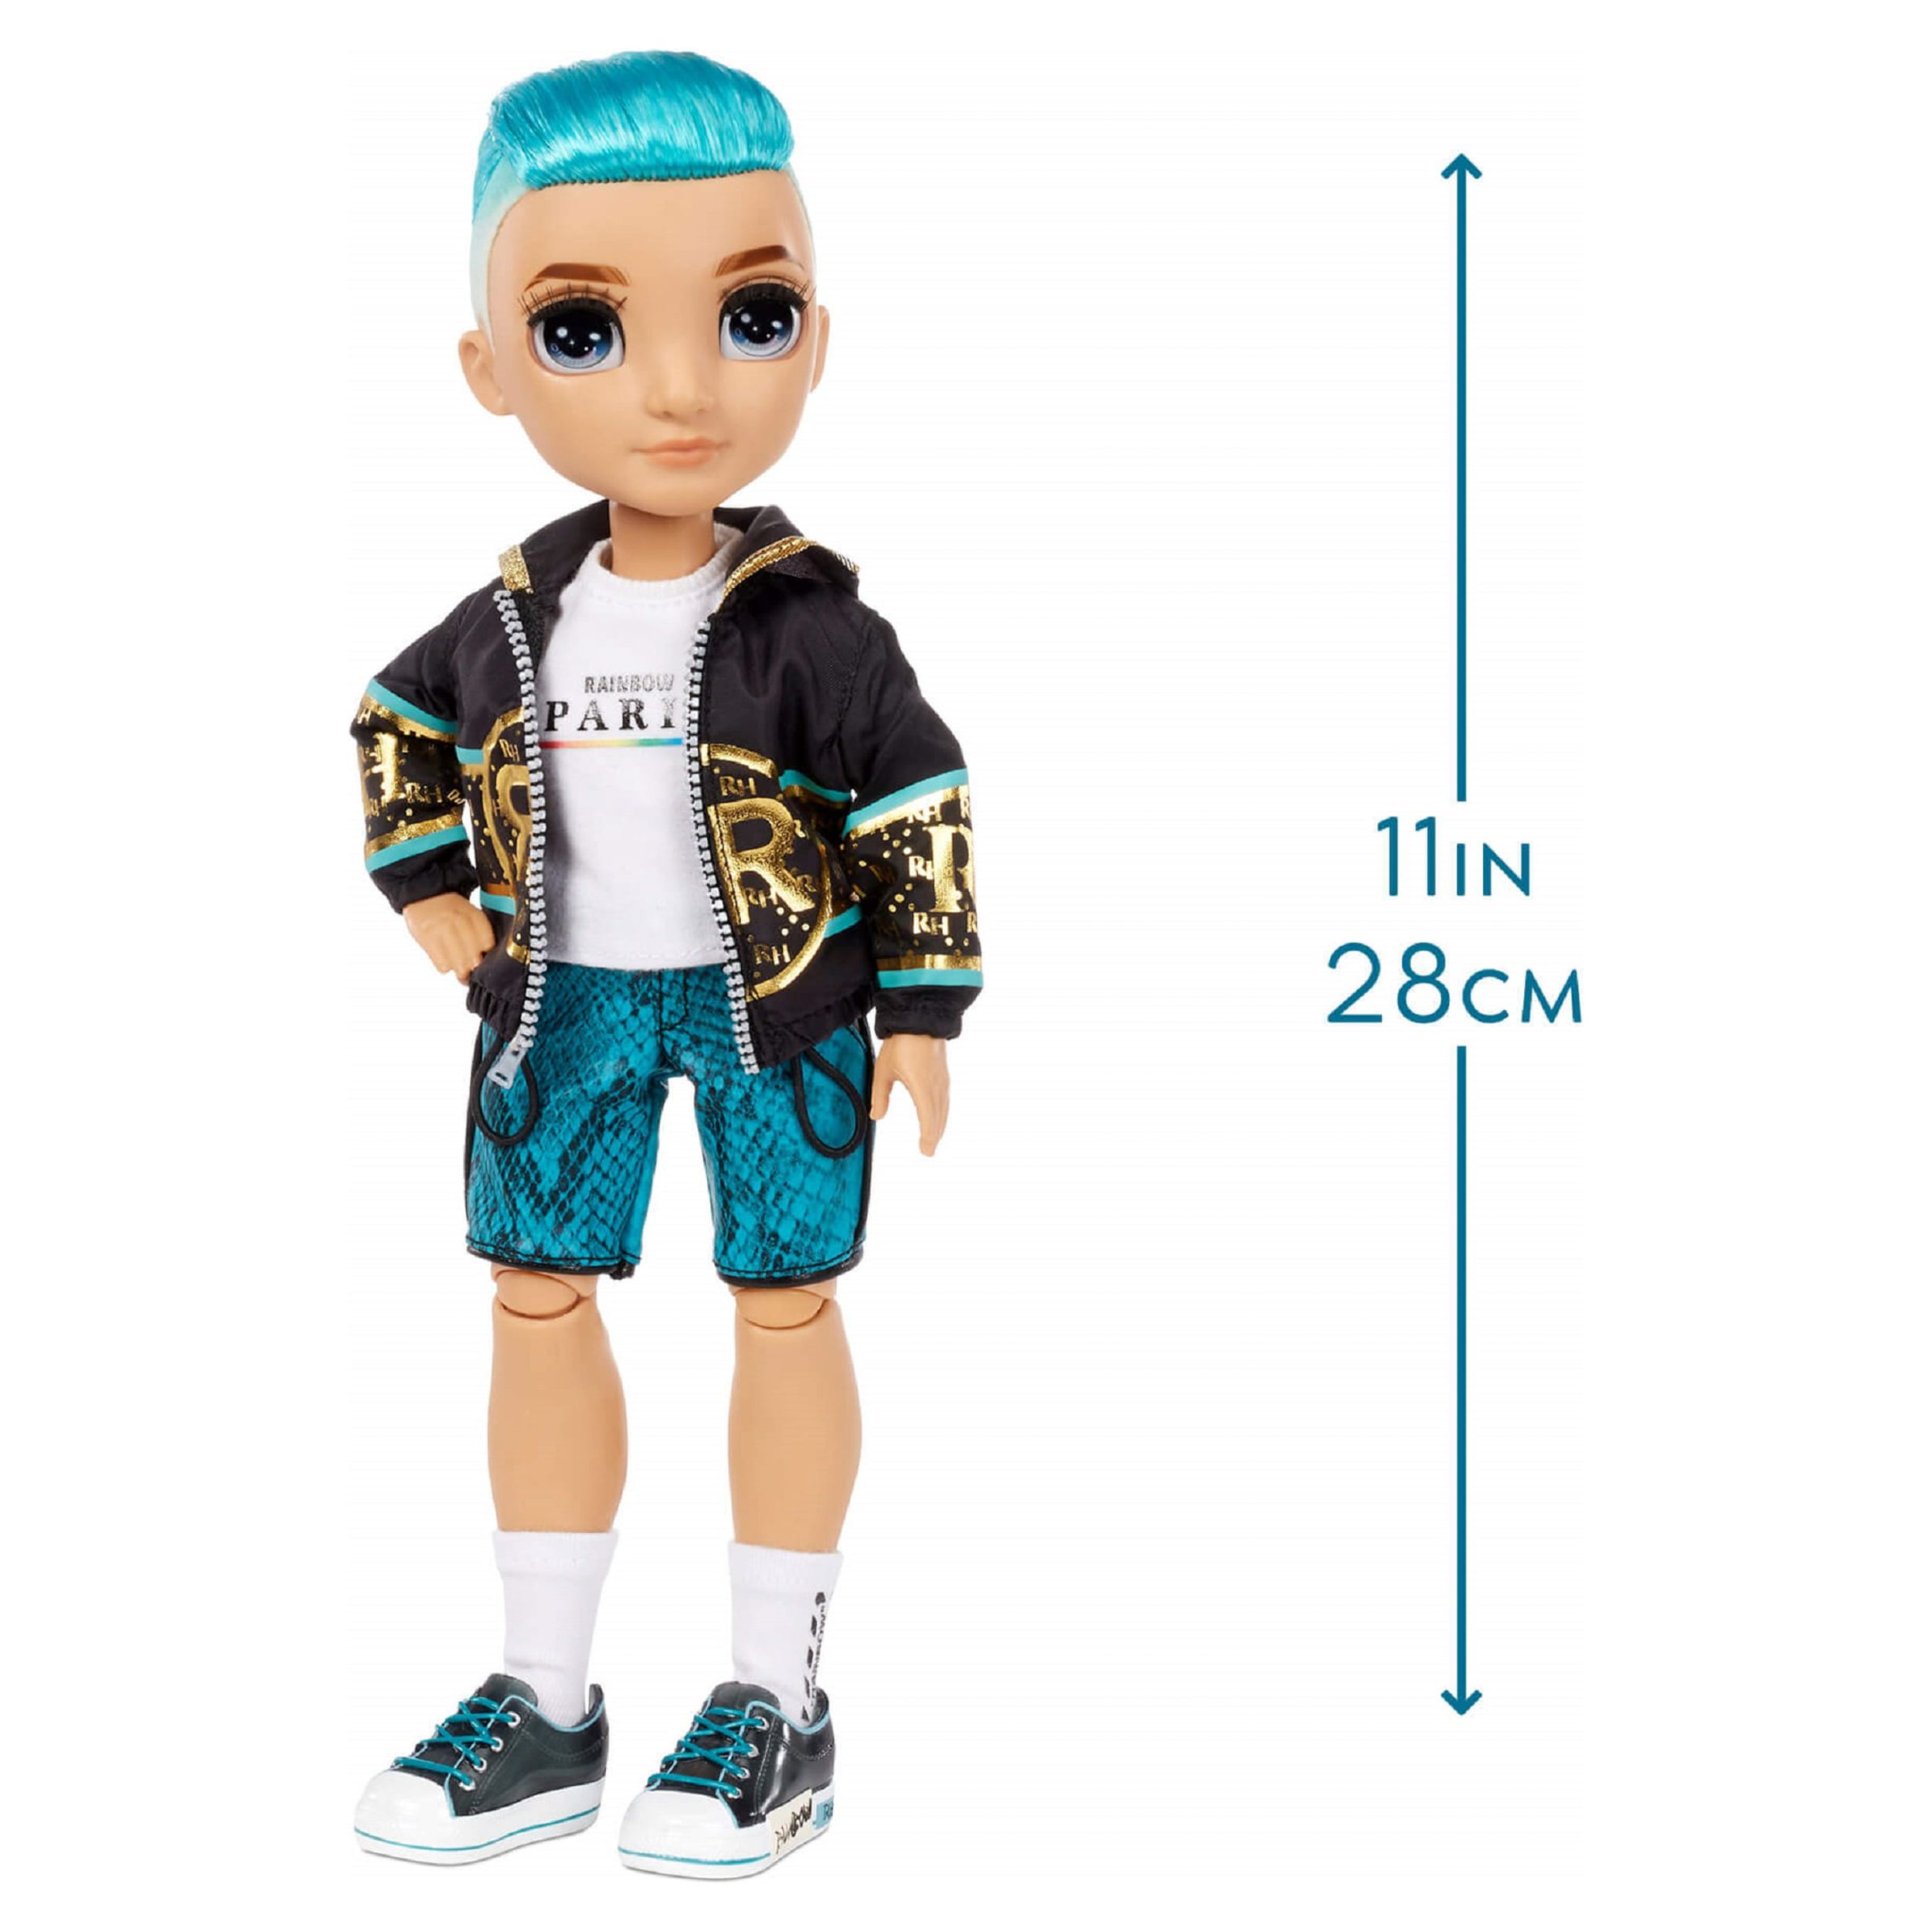 Rainbow High River Kendall – Teal Boy Fashion Doll with 2 Complete Mix & Match Outfits and Accessories, Toys for Kids 6-12 Years Old - image 5 of 7